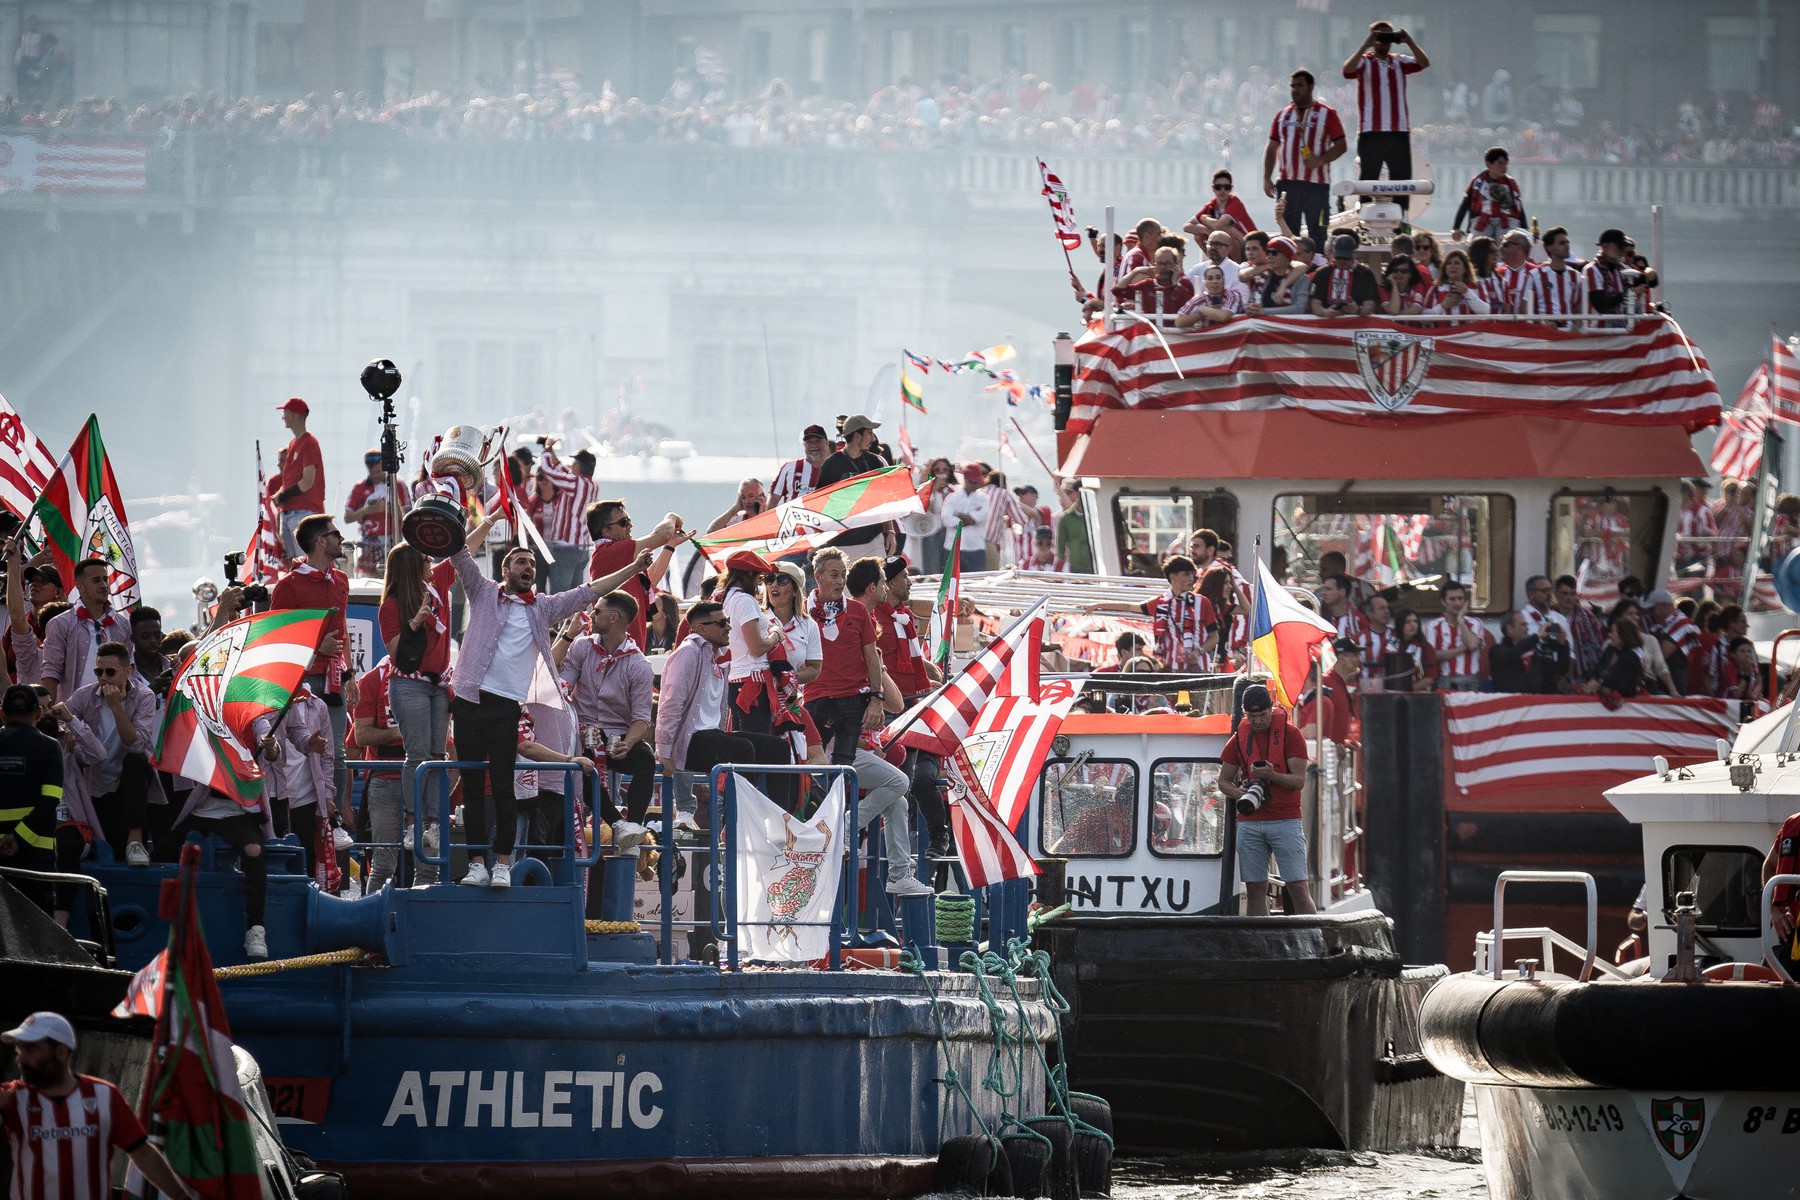 BILBAO, SPAIN - APRIL 11: Players of Athletic Club de Bilbao along with their fans celebrate their Copa del Rey victory in the traditional trophy parade with the â€œGabarraâ€ at Estuary of Bilbao, Spain on April 11, 2024. Diego Radames / Anadolu,Image: 864124792, License: Rights-managed, Restrictions: , Model Release: no, Credit line: Diego Radames / AFP / Profimedia